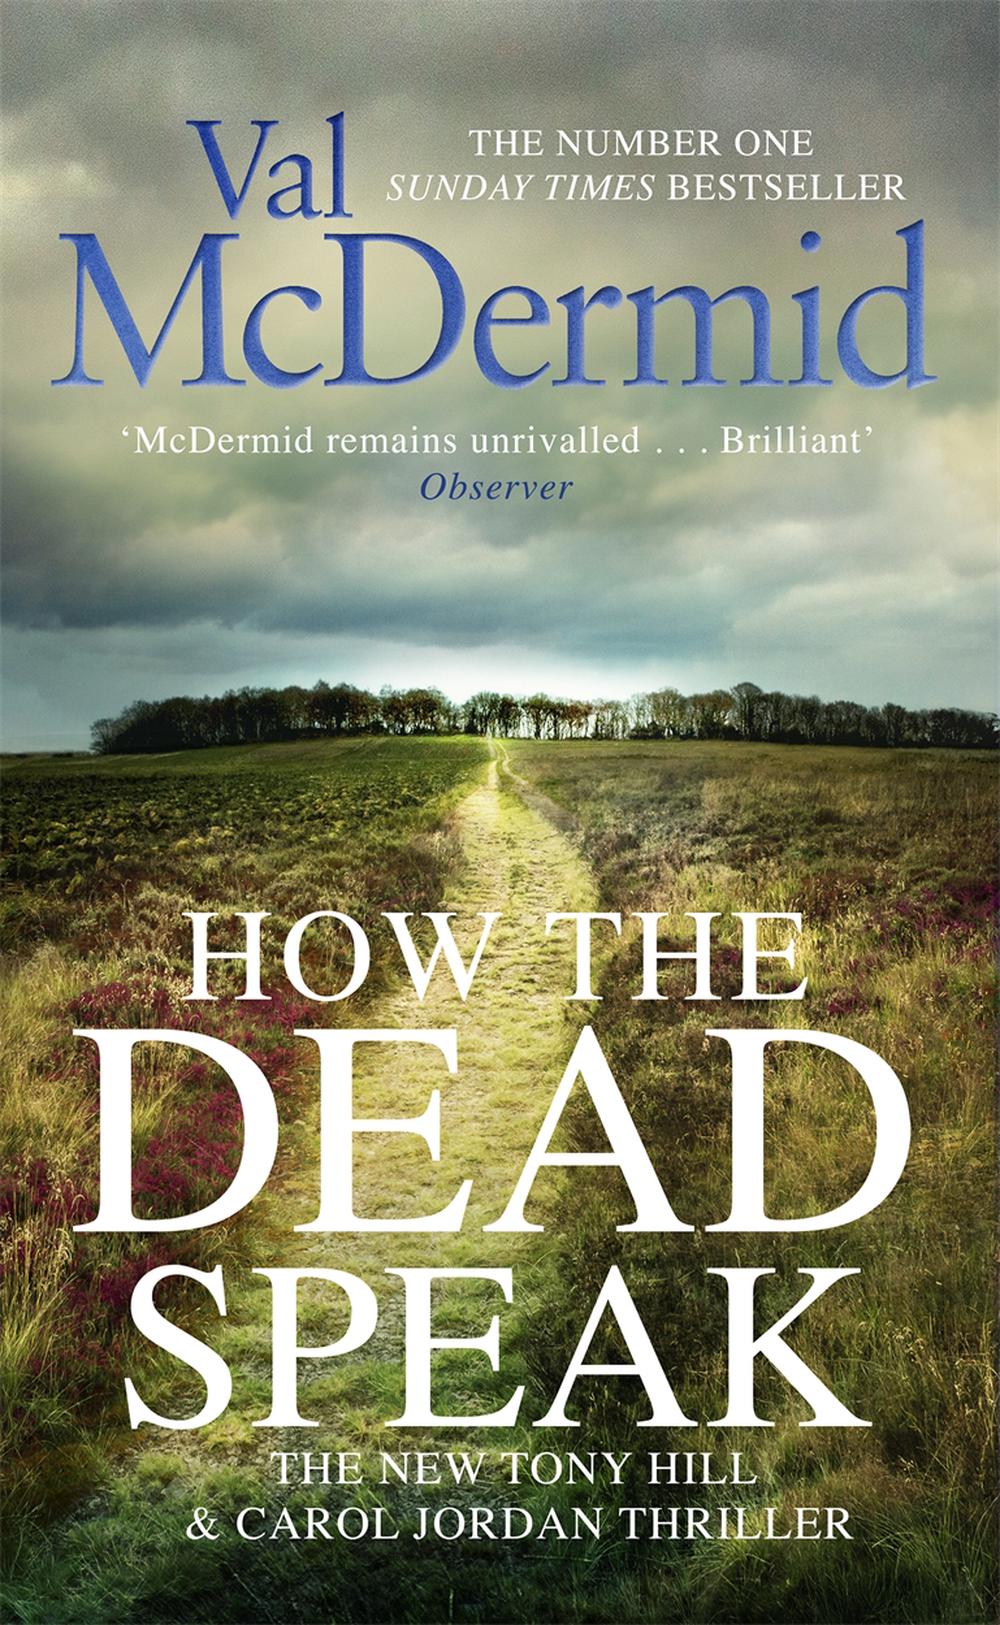 dead beat by val mcdermid